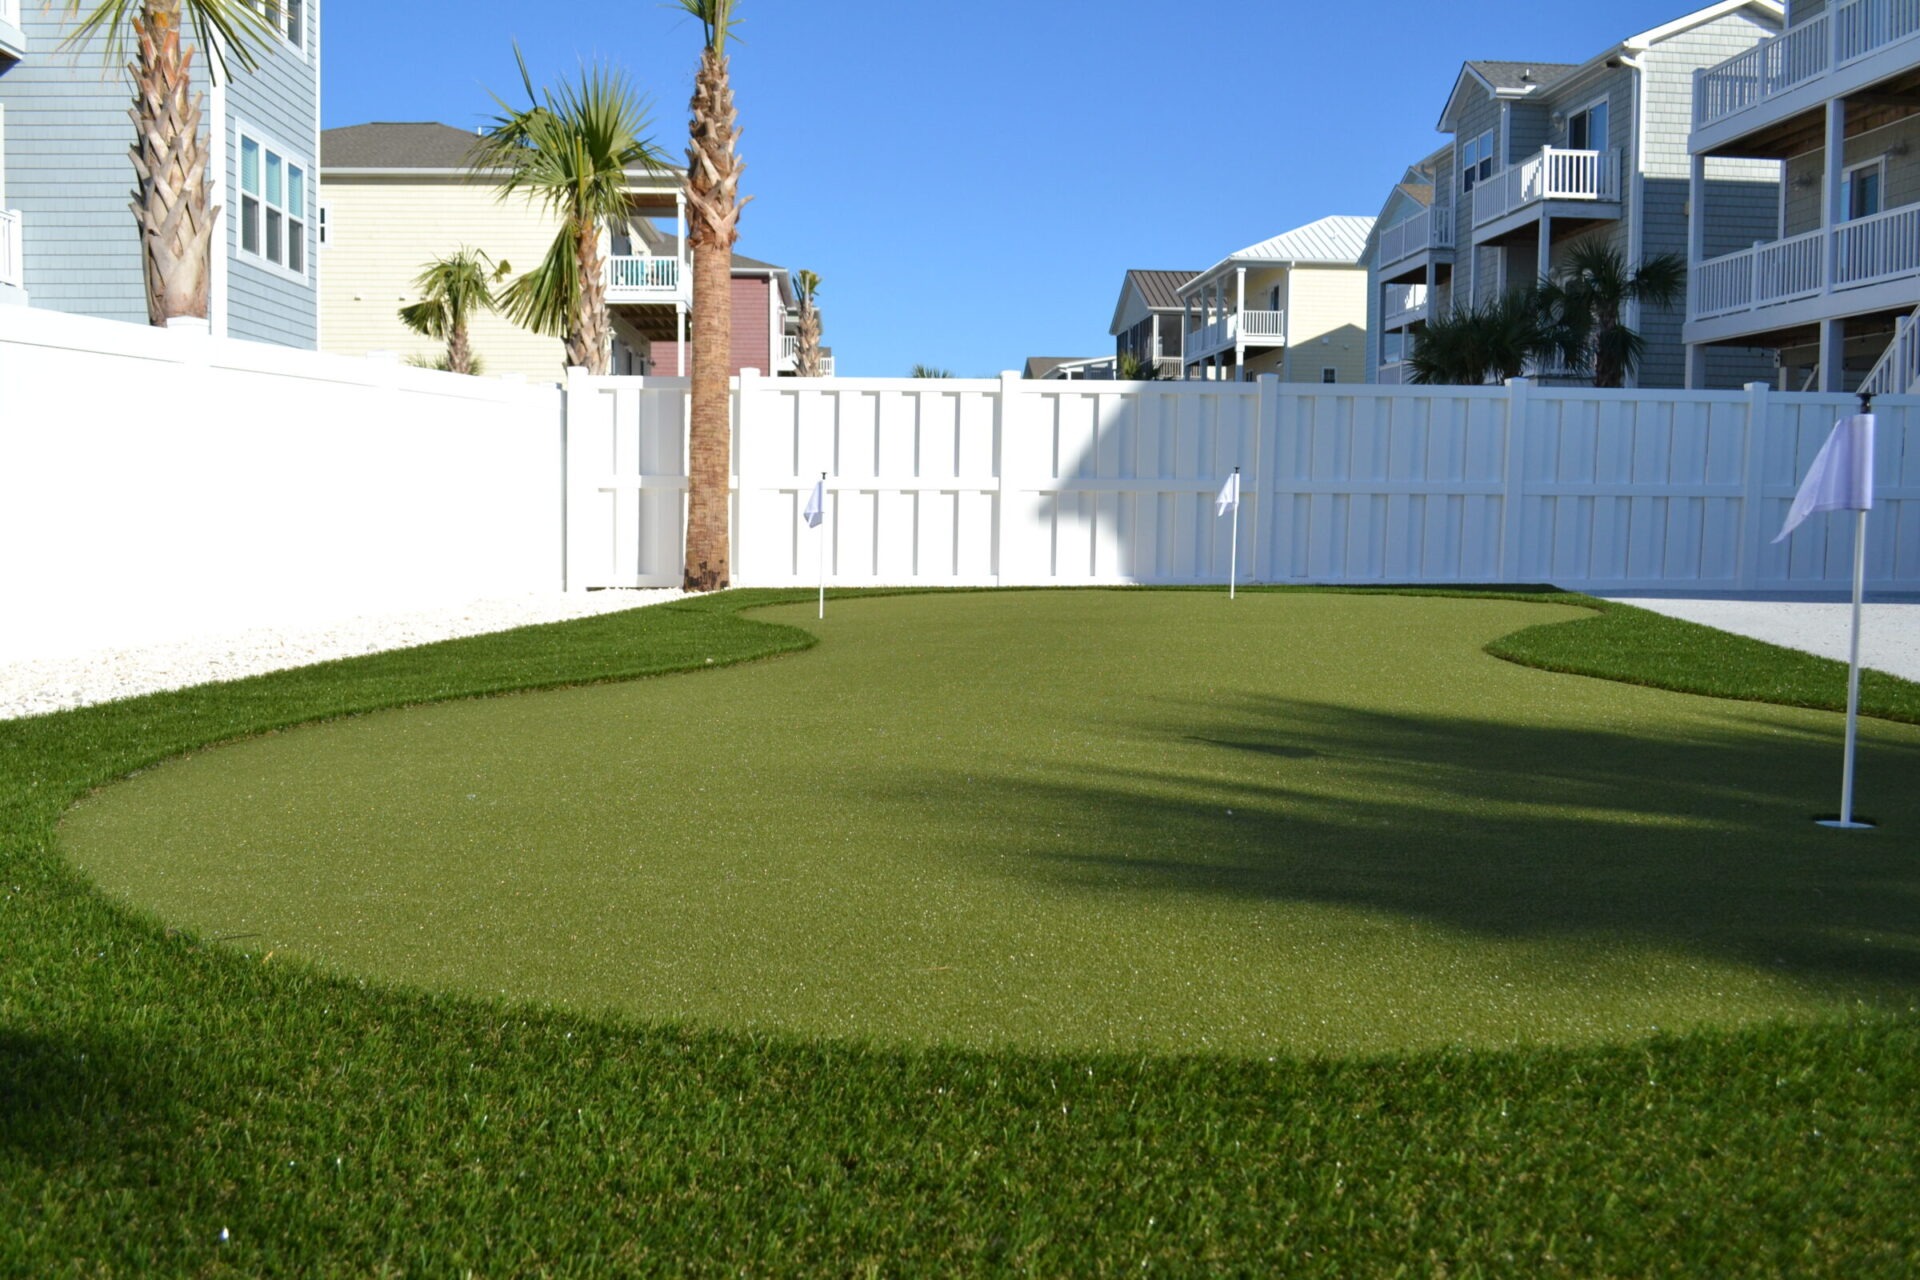 A small artificial putting green with holes and flags enclosed by a white fence, surrounded by houses and palm trees under a clear blue sky.